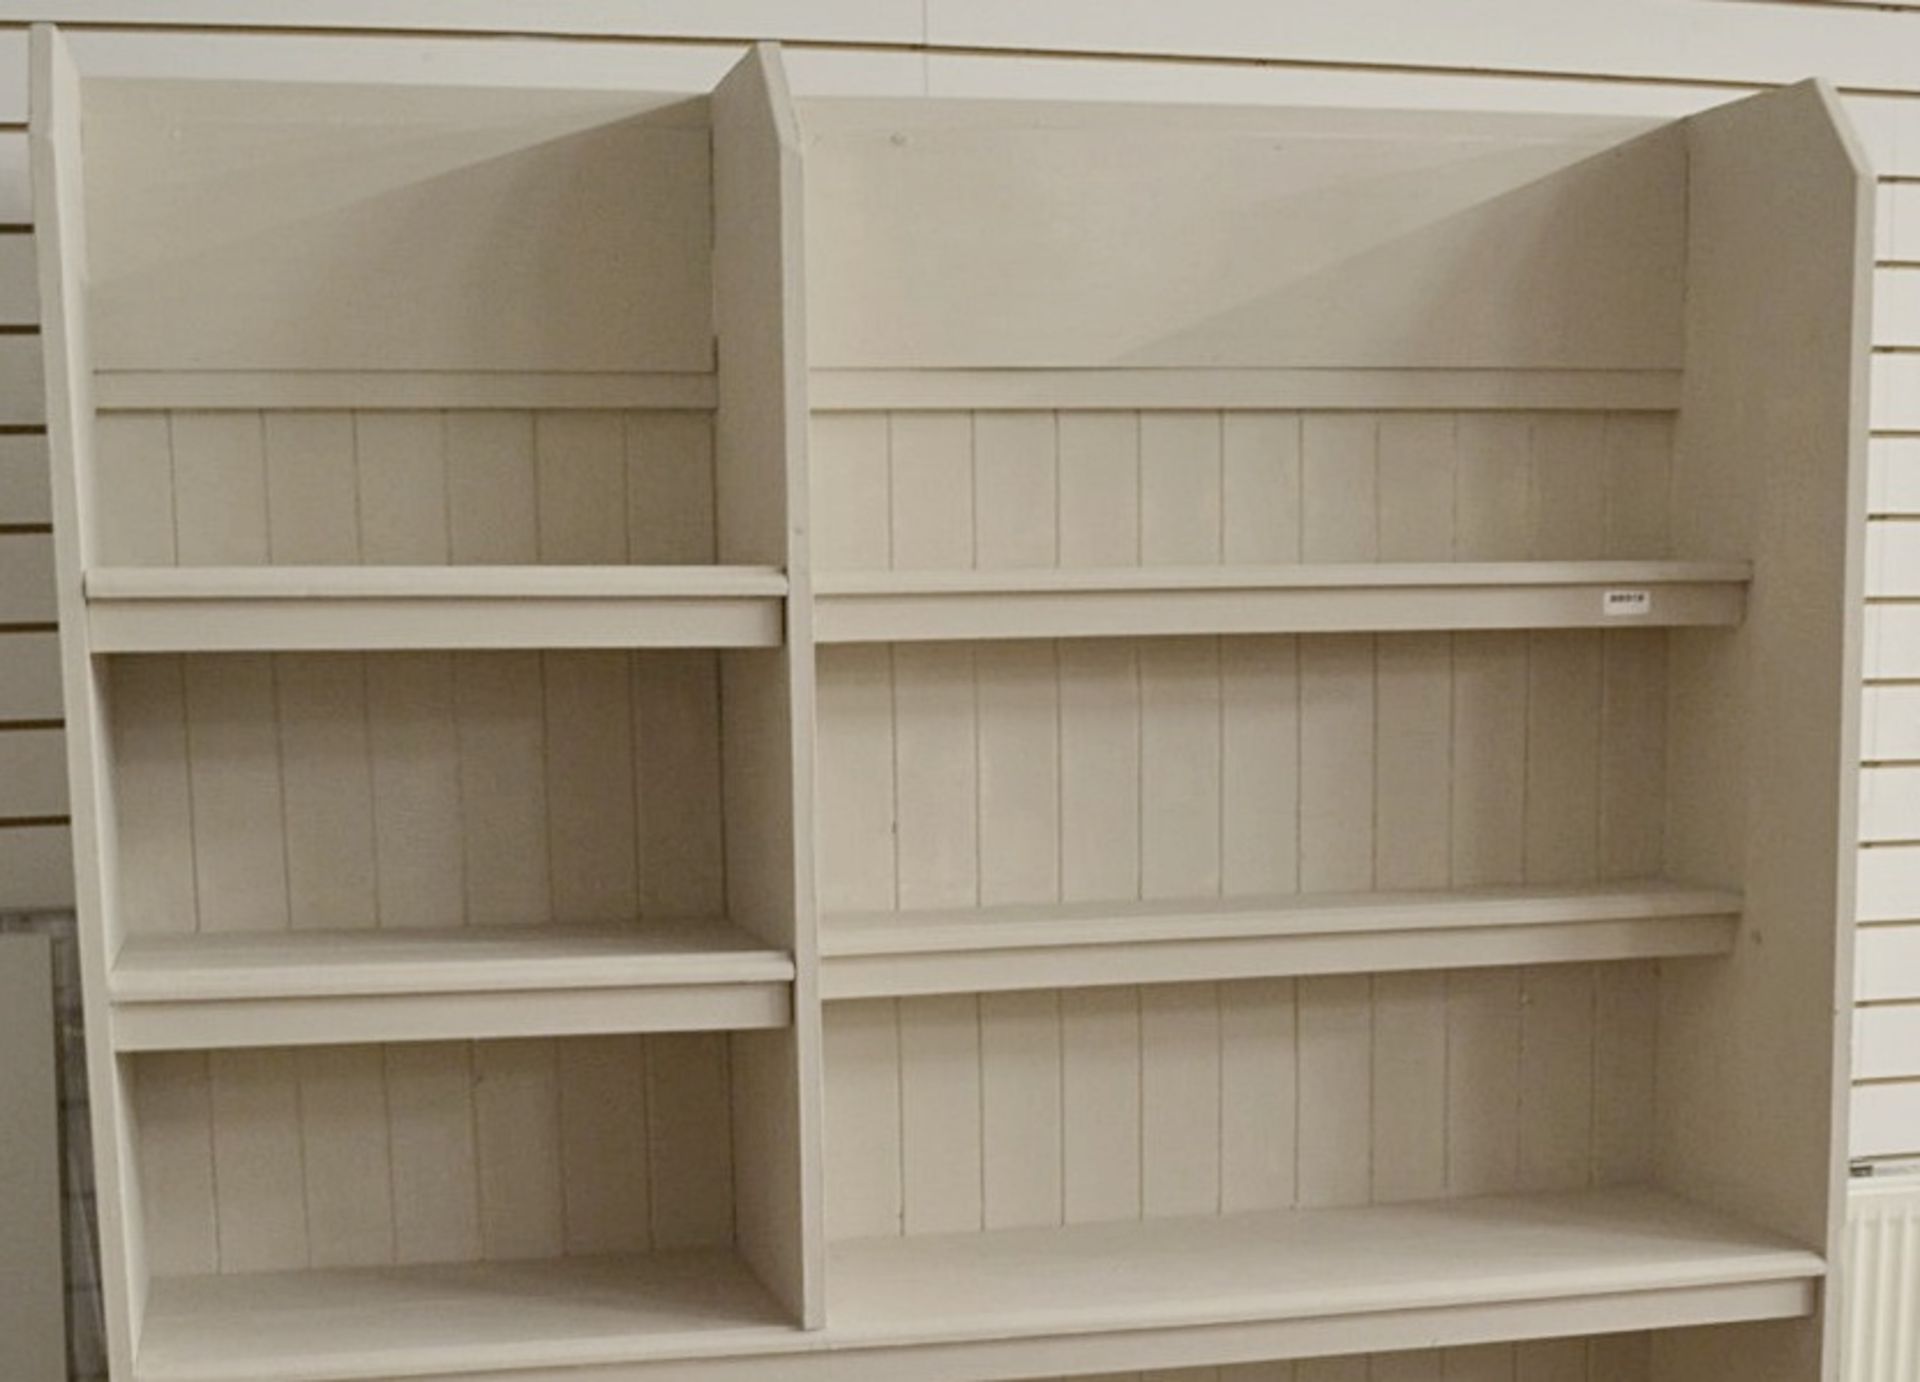 1 x Large 2-Metre Tall Painted Dresser Unit With 2 Sliding Door Storage And Paneled Back - Image 3 of 4